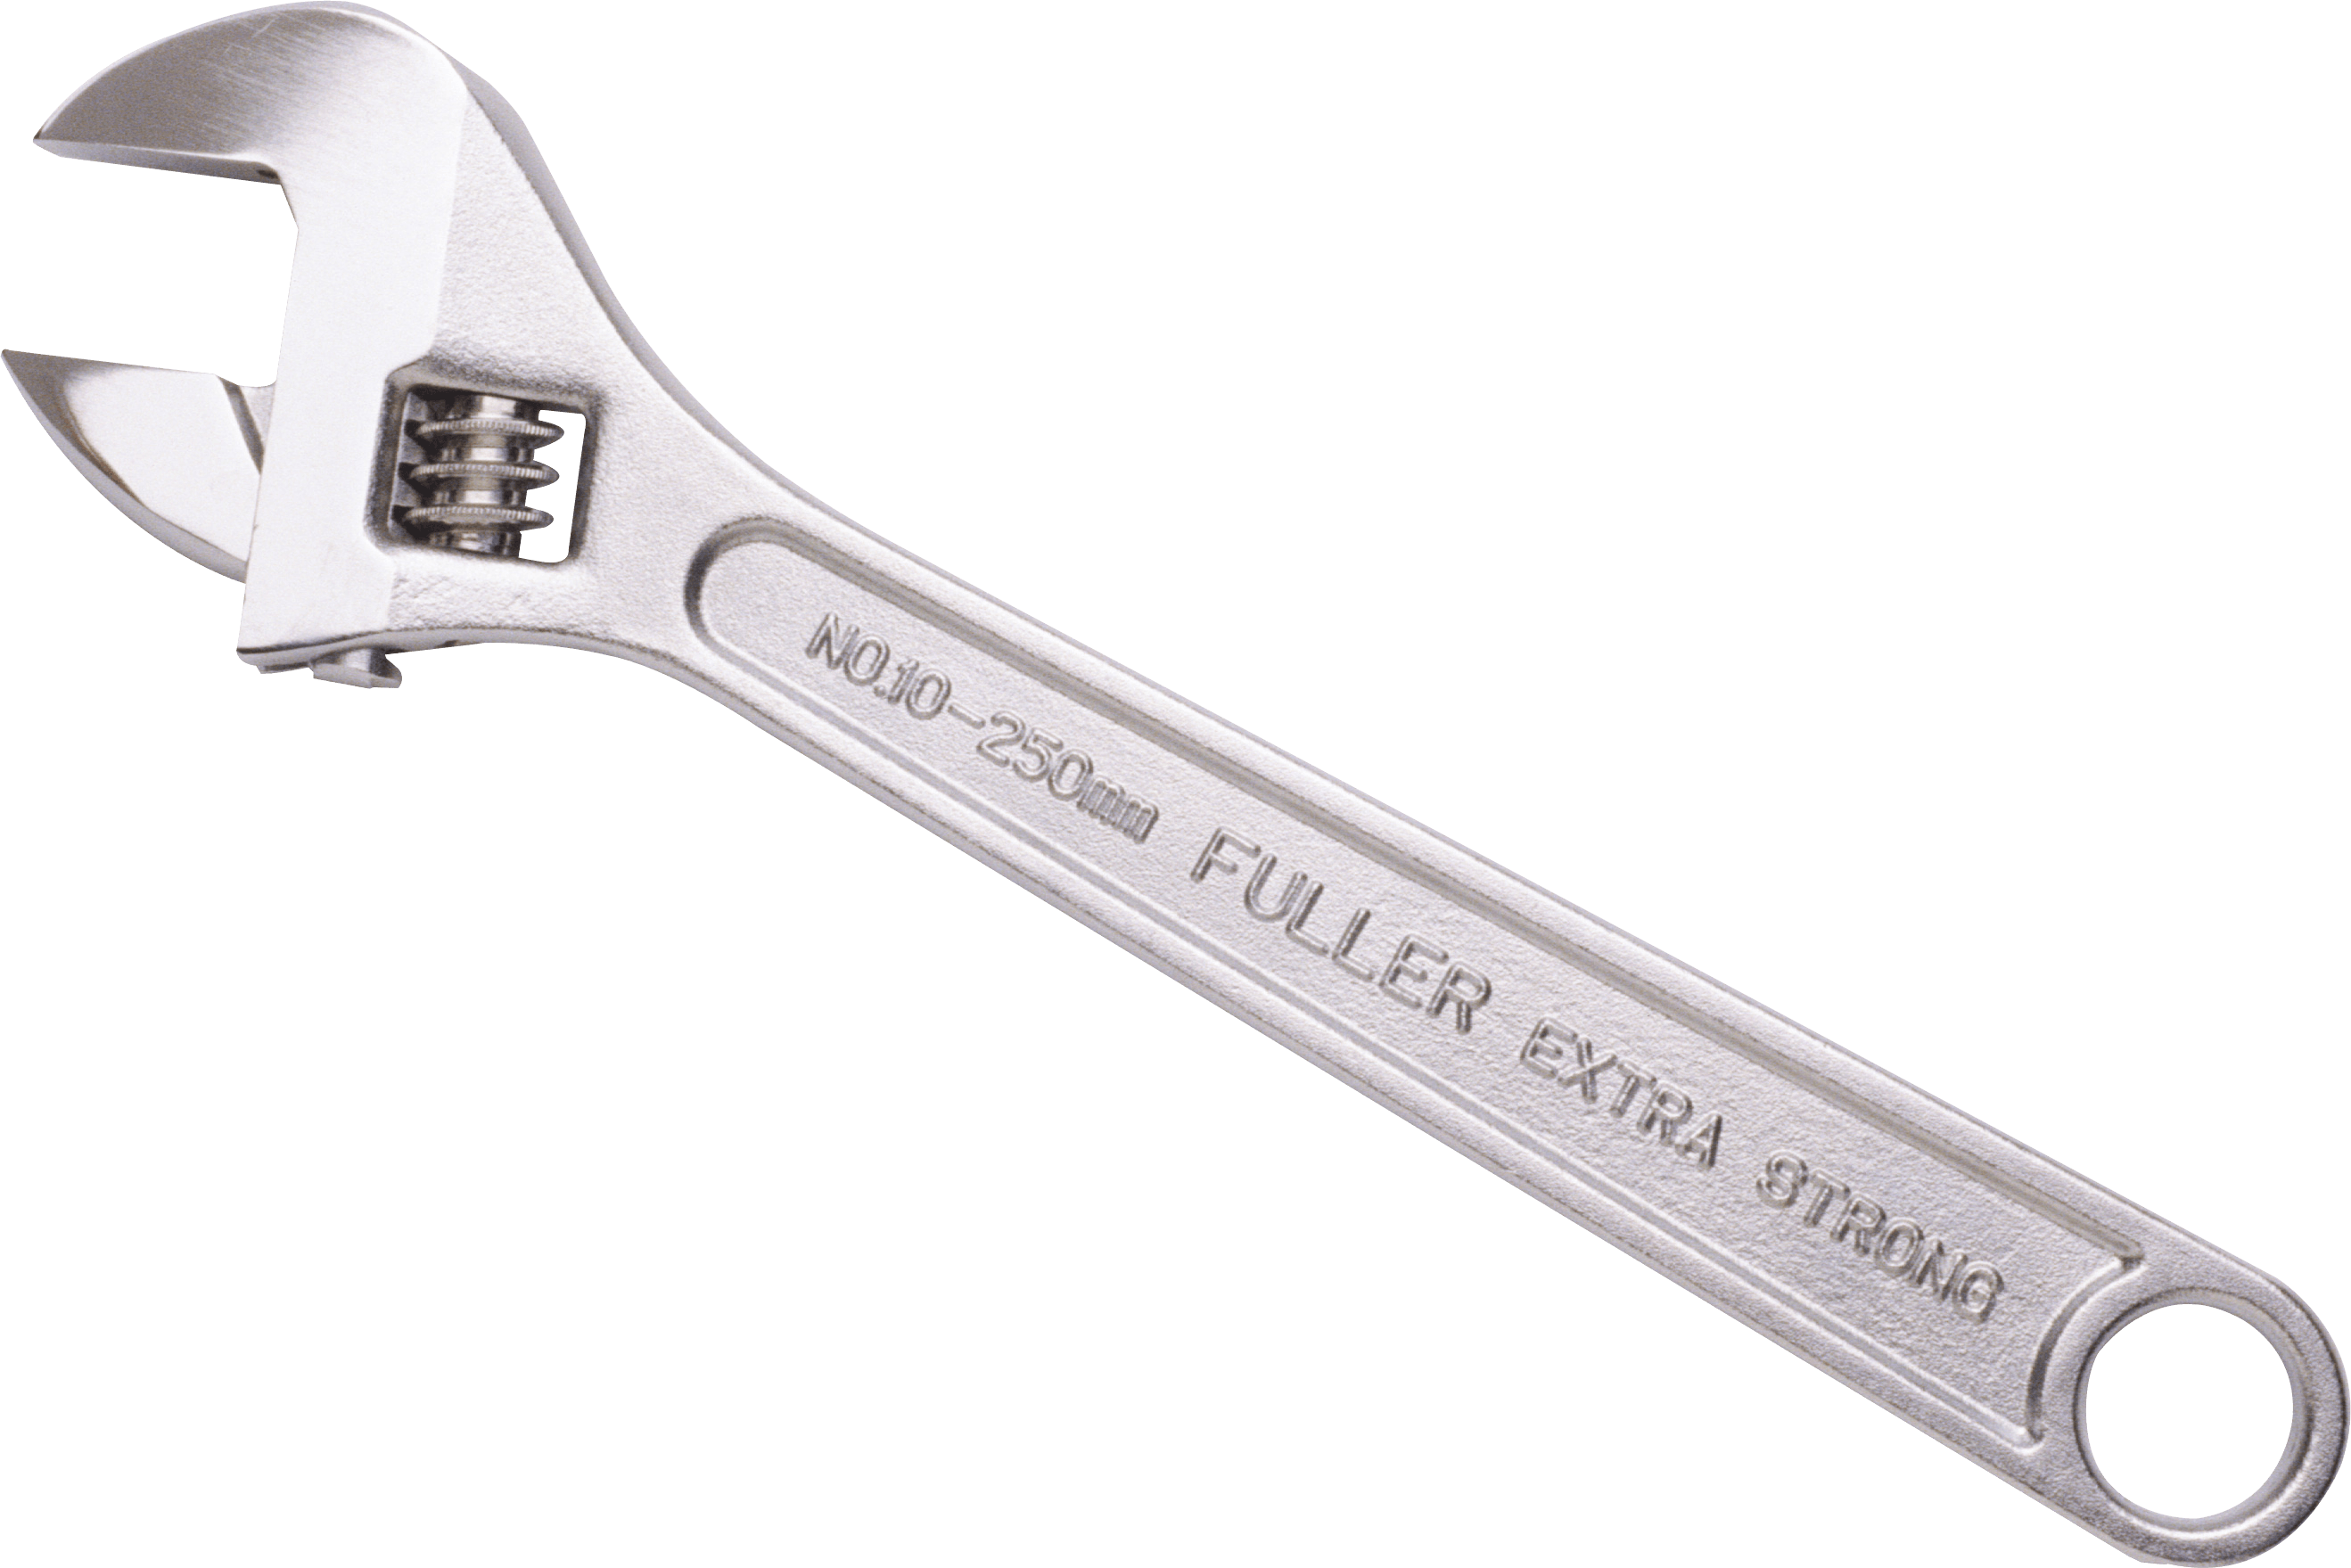 Wrench Spanner Png Image PNG Image